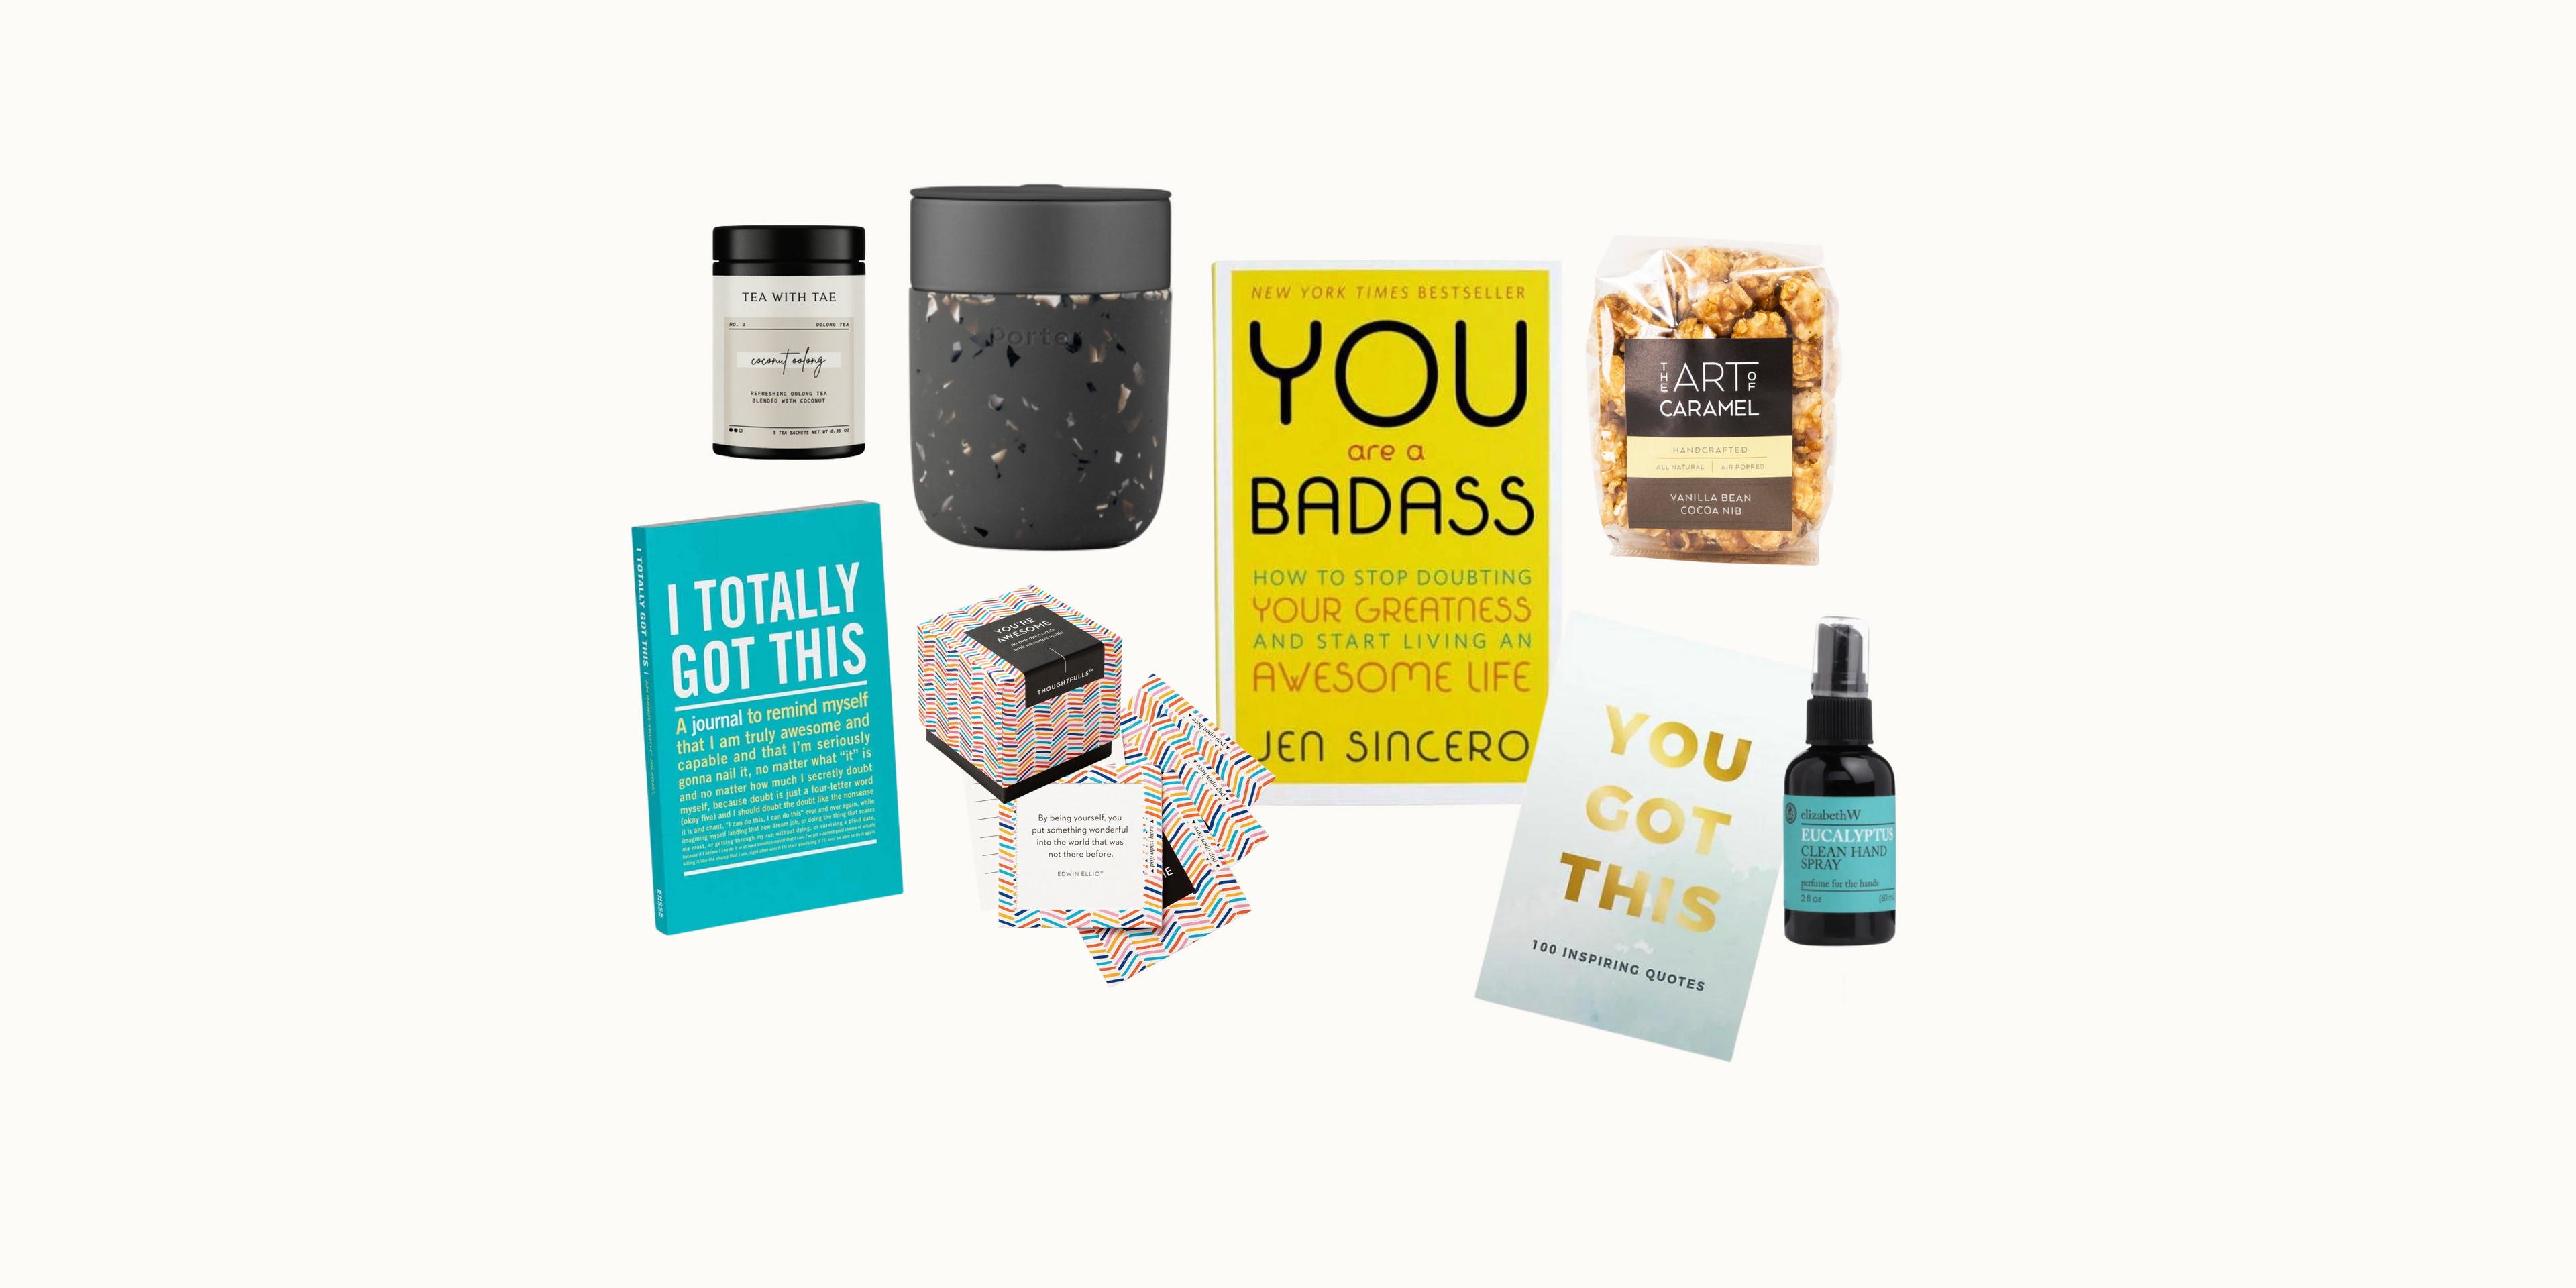 Bocu Holiday Gift Guide - Gift Boxes for Clients and Employees, Motivational Gifts